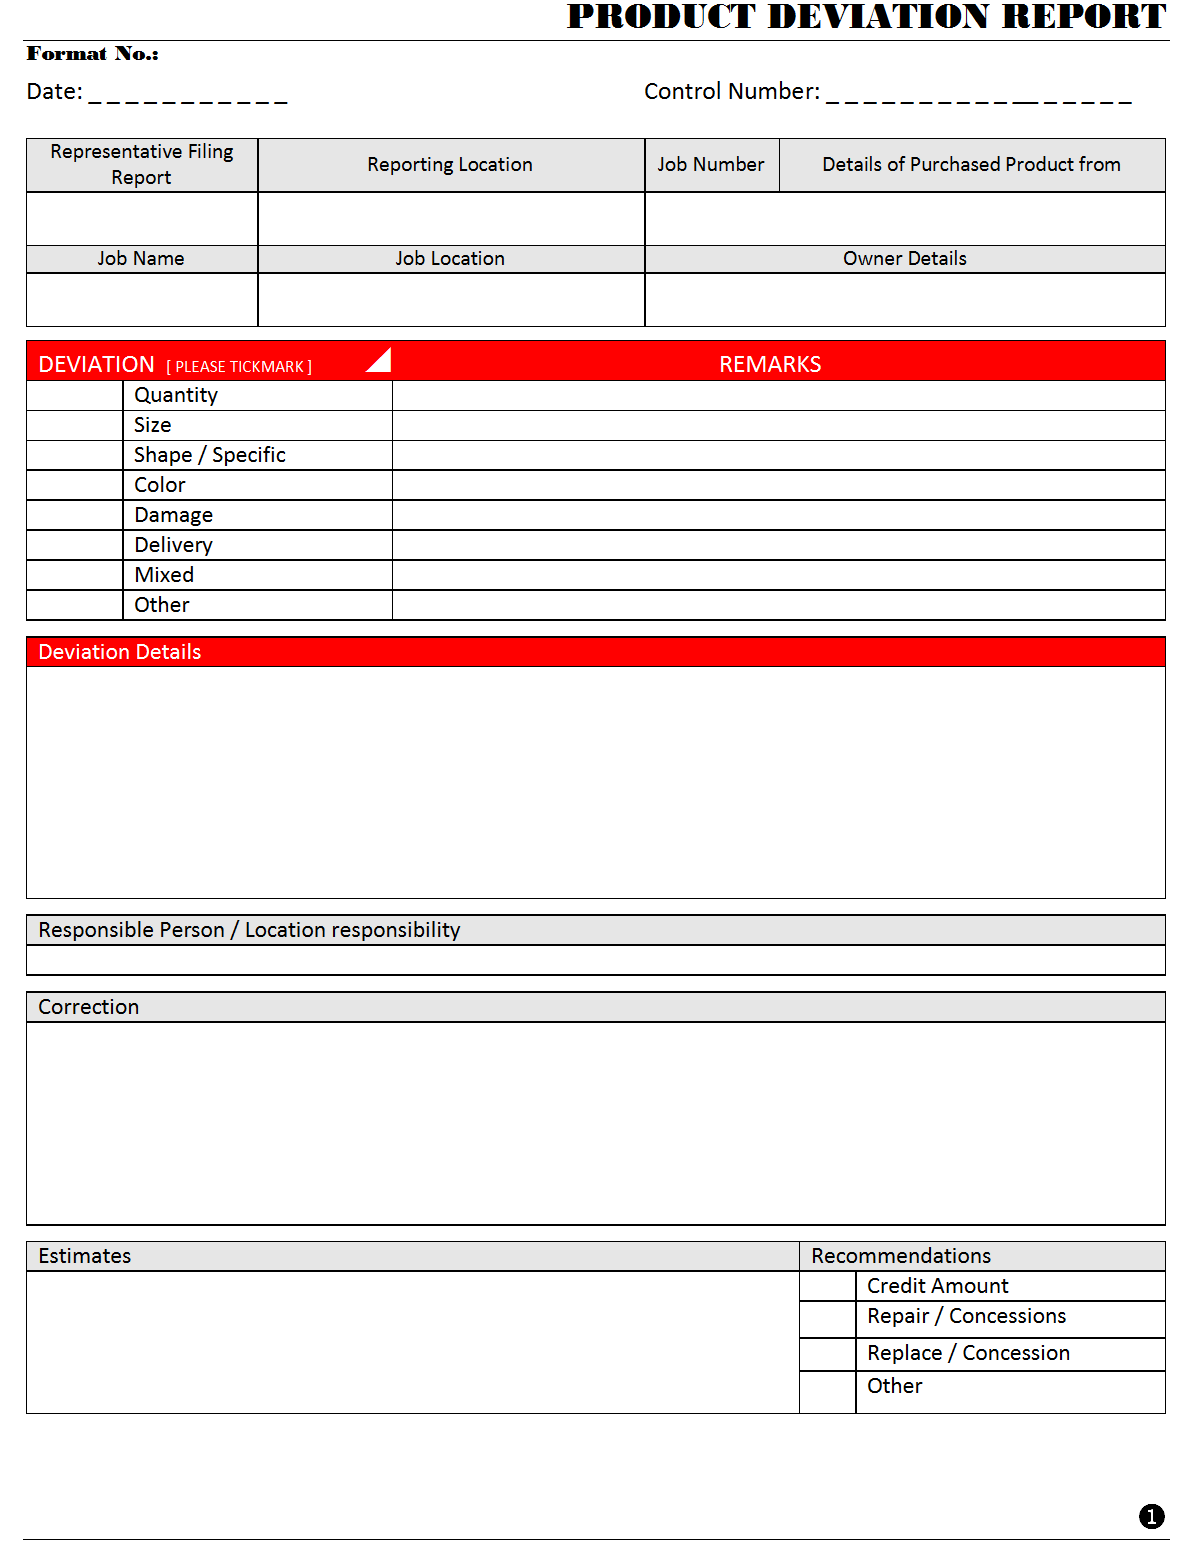 Product Deviation Report Format  Samples  Excel Document For Deviation Report Template